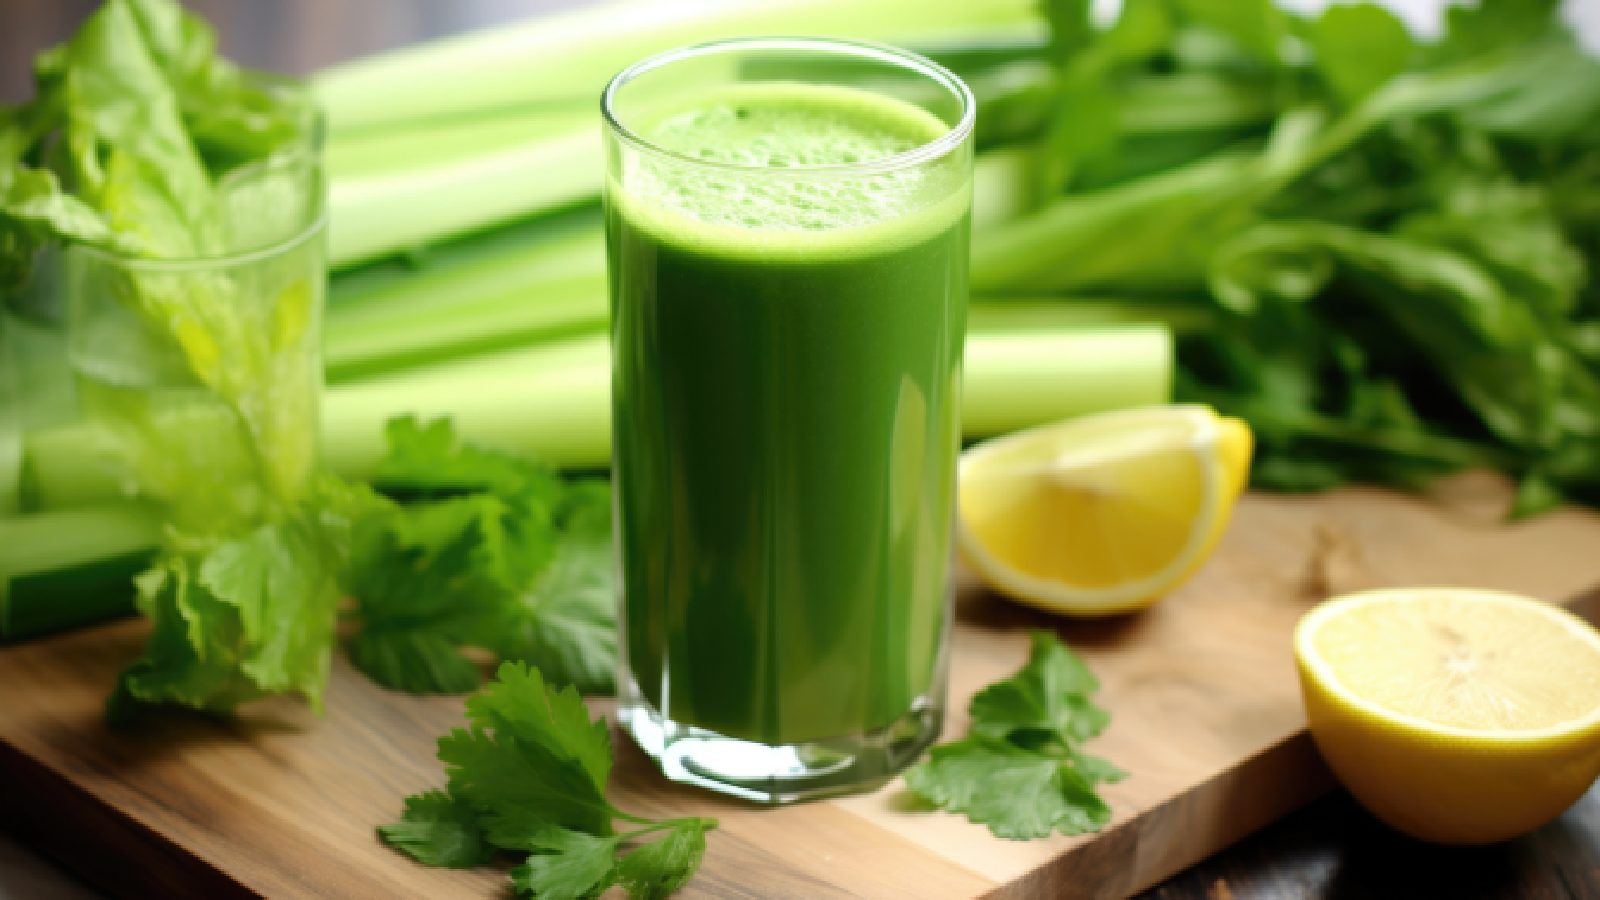 Celery juice benefits: 8 reasons to drink it and how to make it